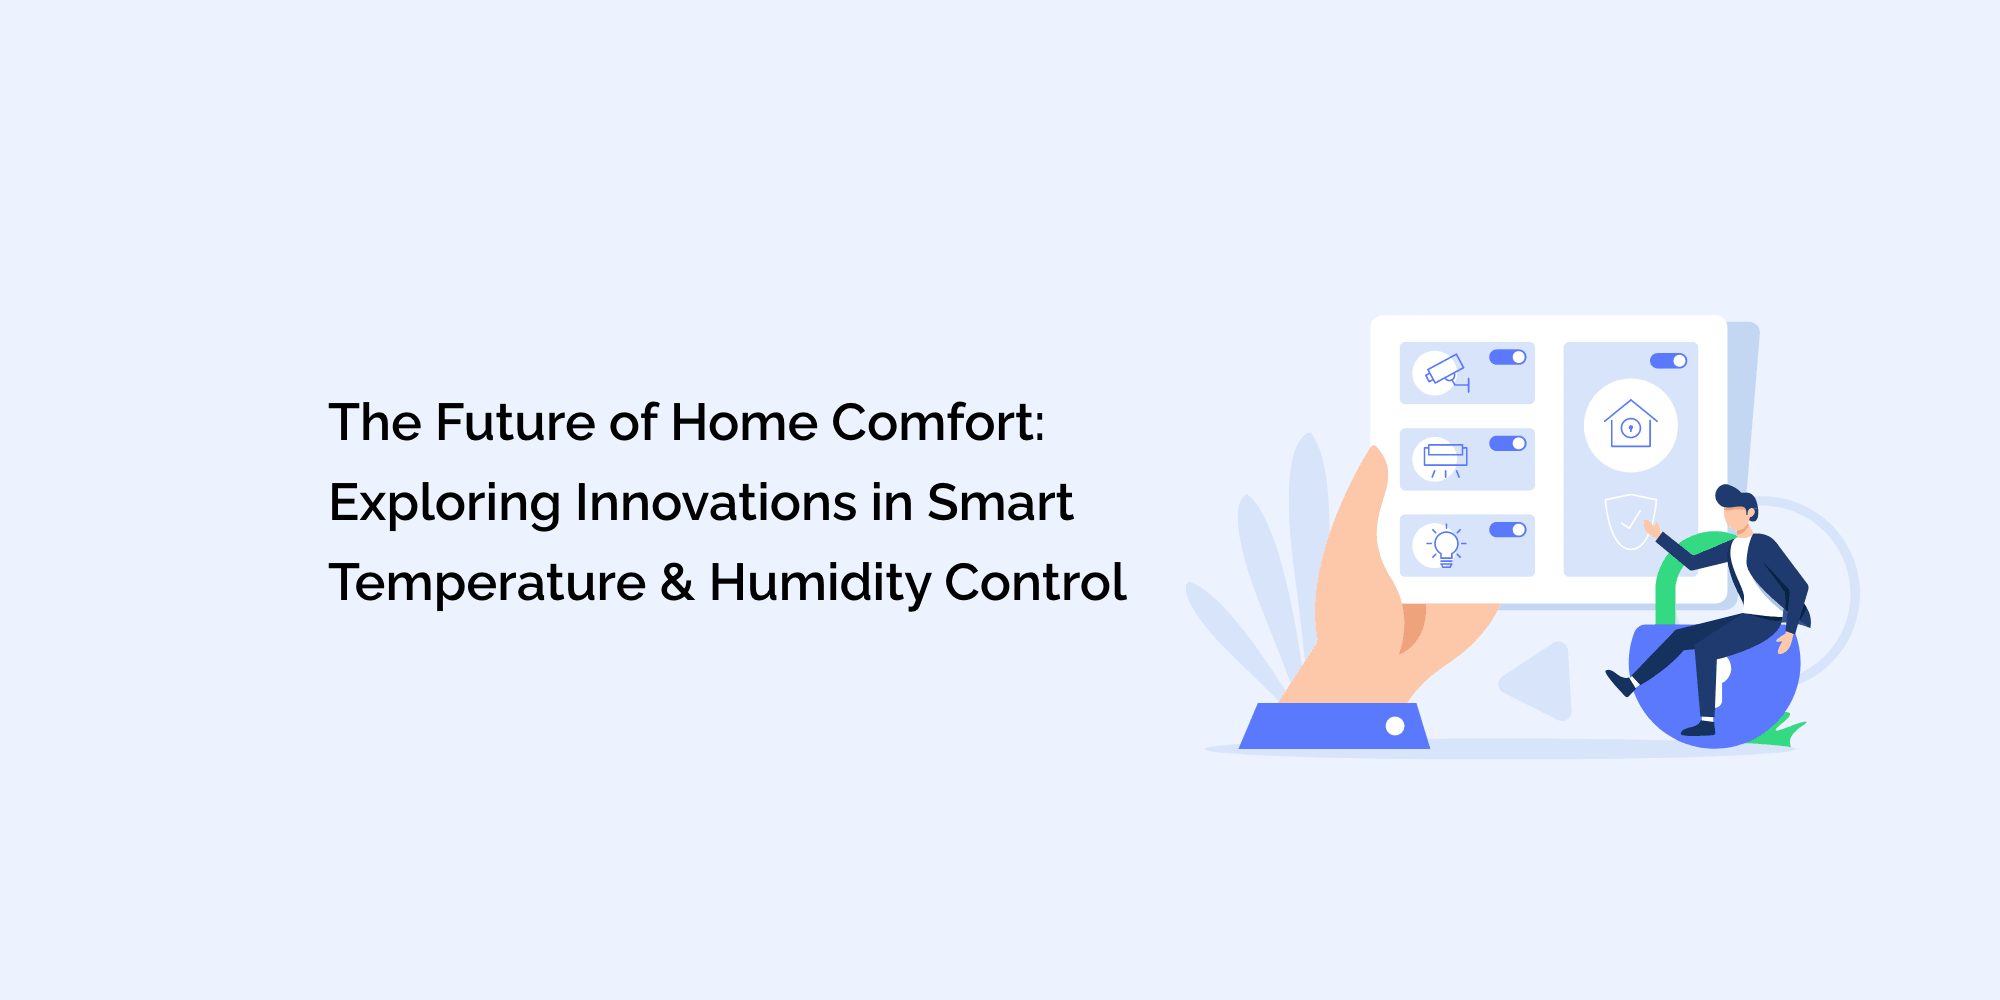 The Future of Home Comfort: Exploring Innovations in Smart Temperature and Humidity Control